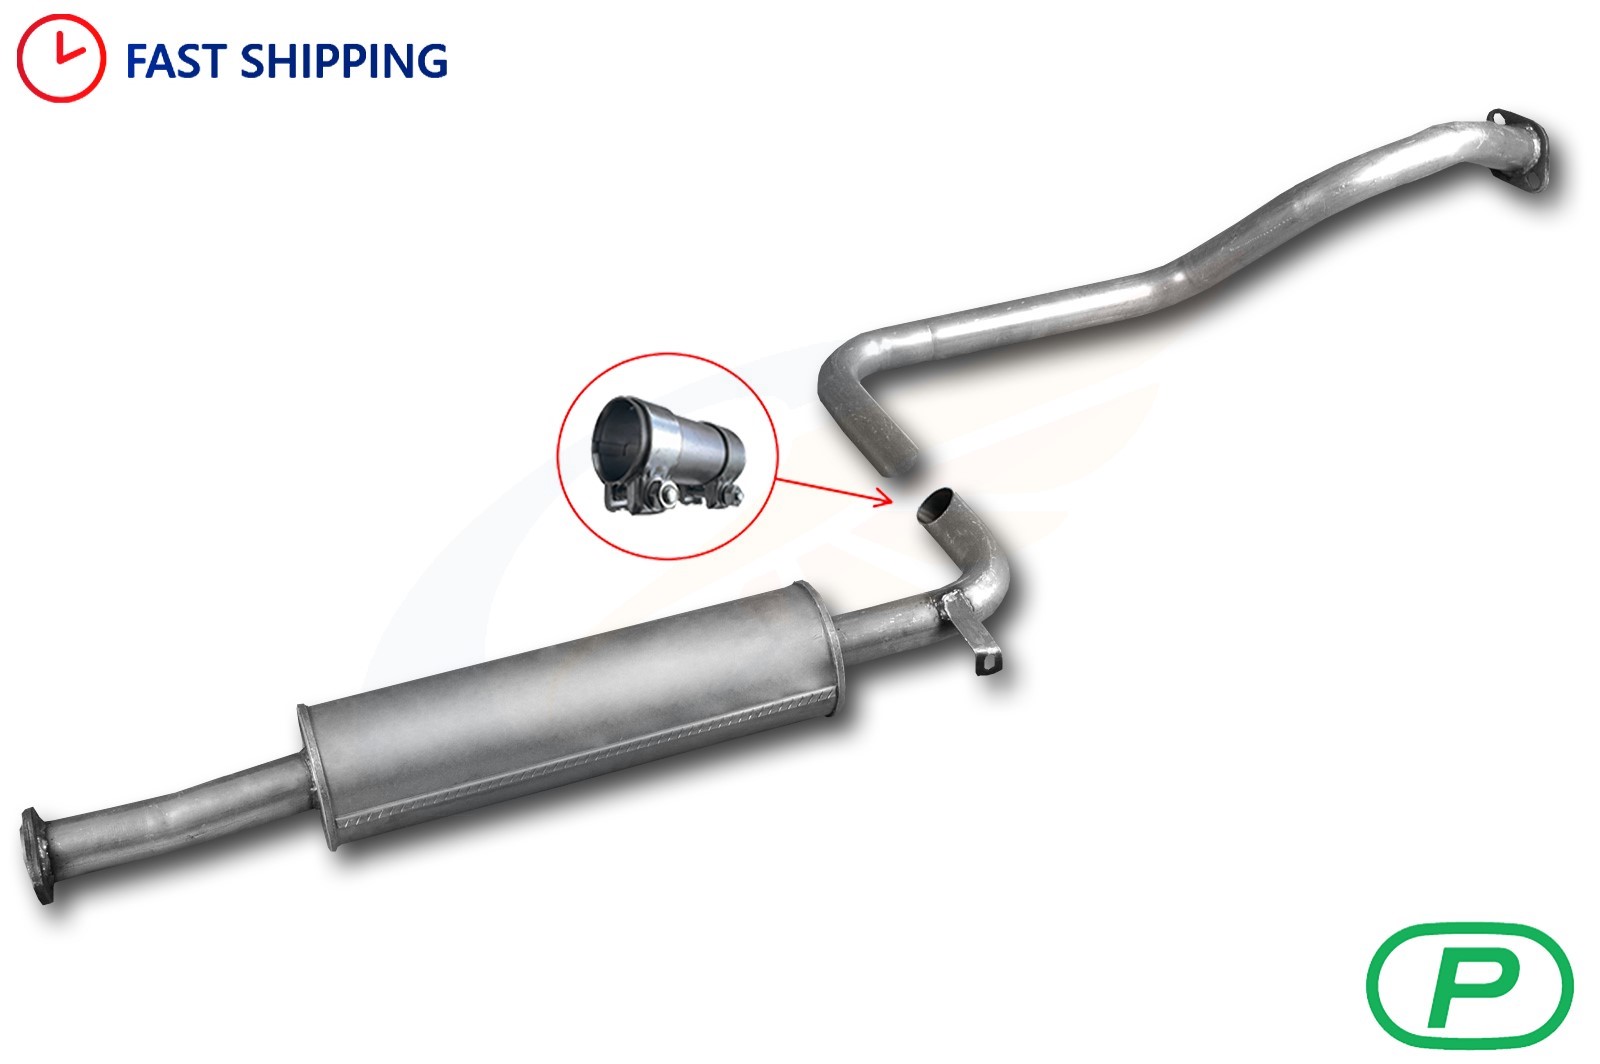 Full exhaust from CAT mounting kit for NISSAN MAXIMA 2.0 3.0 1995-2000